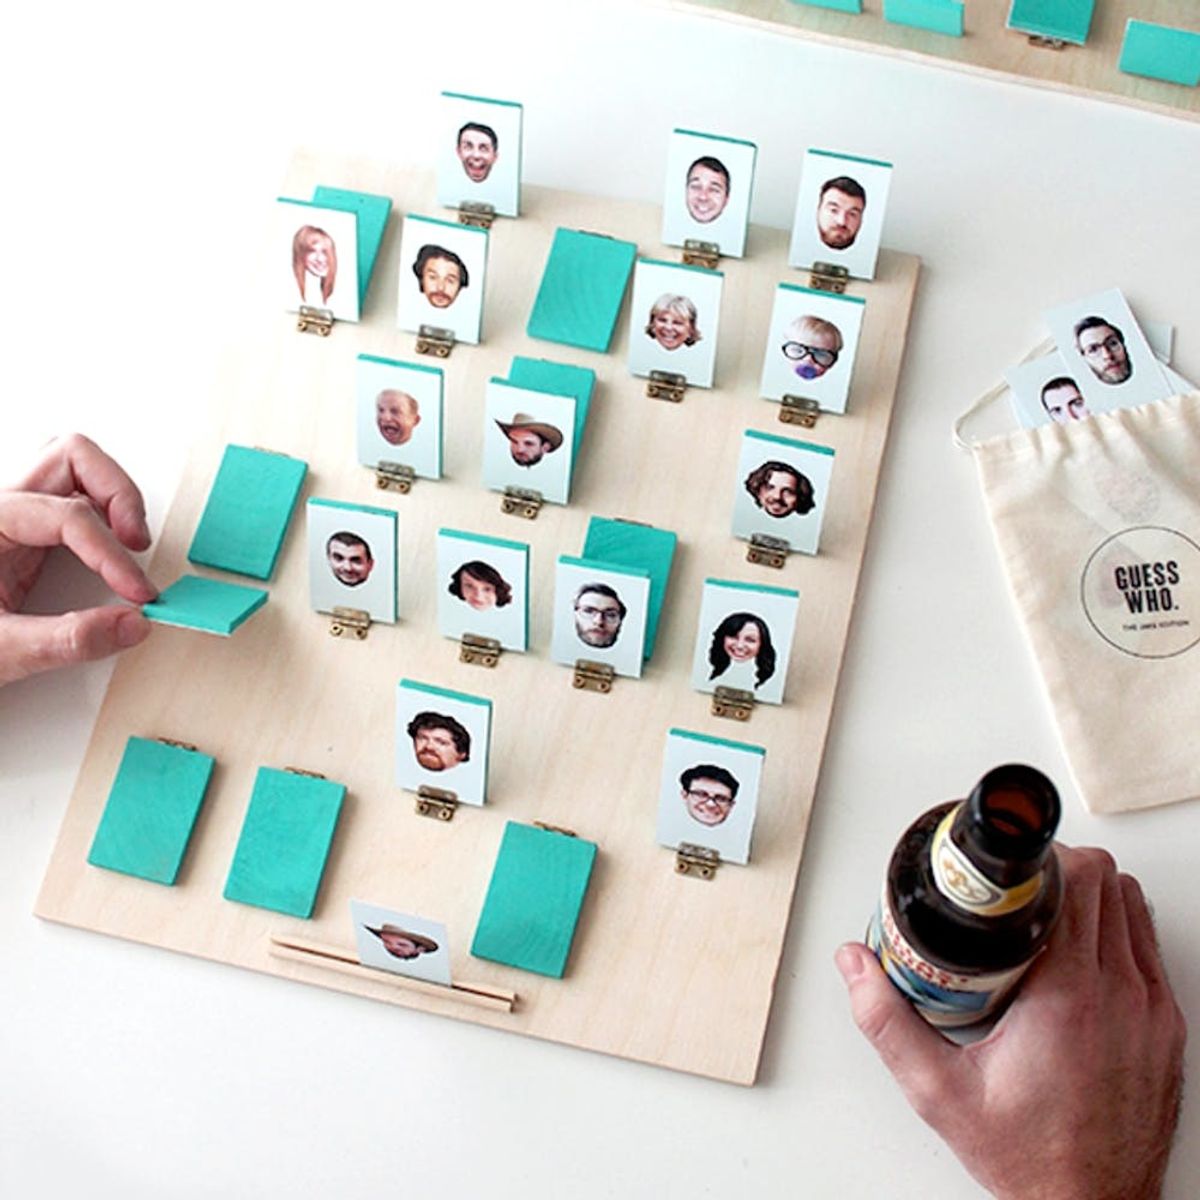 What to Make This Weekend: Personalized Guess Who, Corner Organizer + More